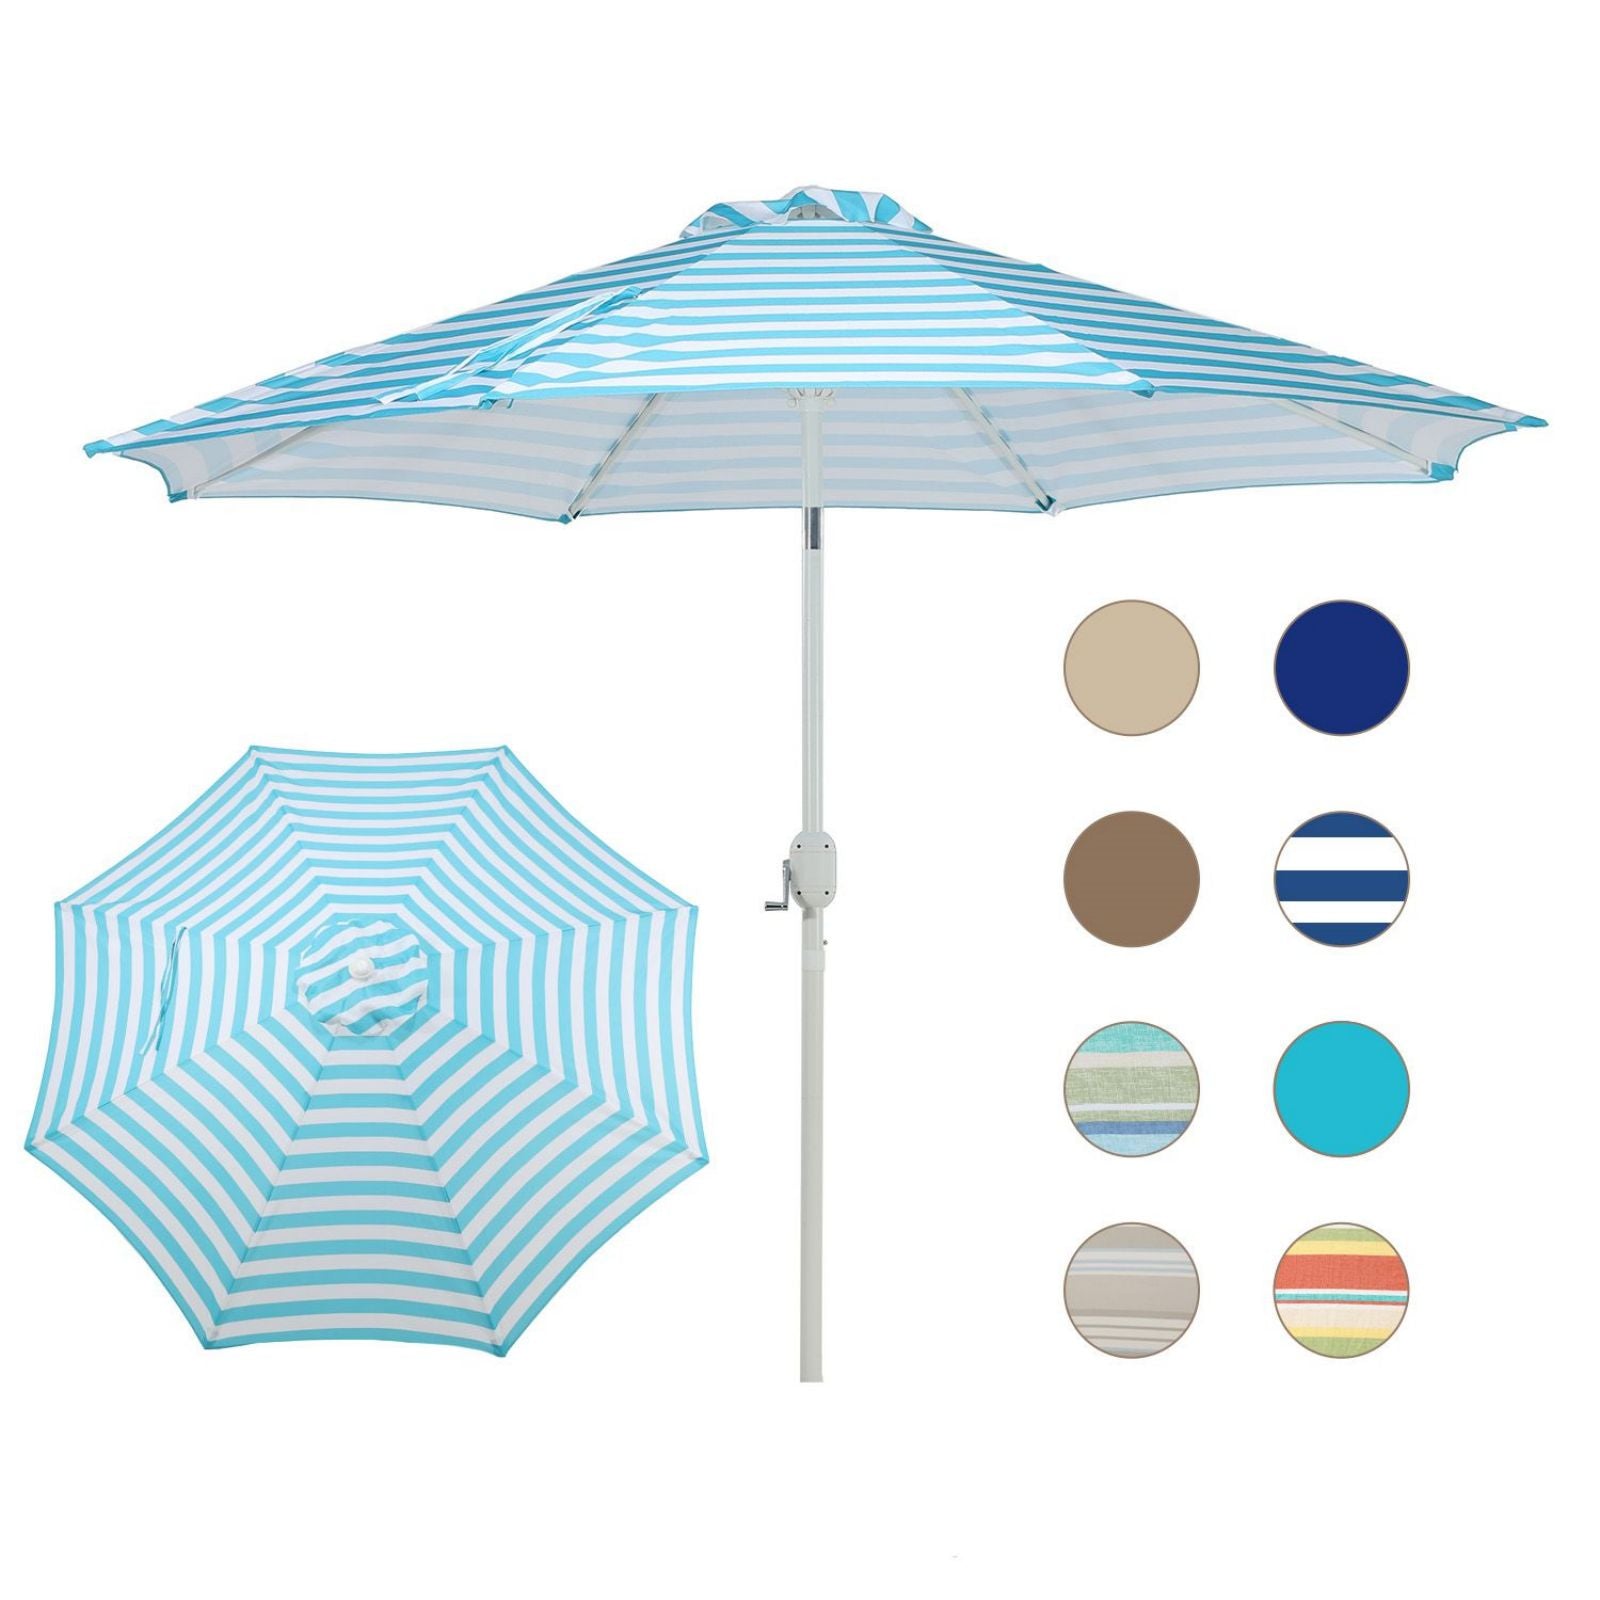 9FT Outdoor Patio Market Umbrella Aluminum Frame with Push Button Tilt Crank and 8 Steel Ribs, UV Protection  Aoodor  Light Blue and White  